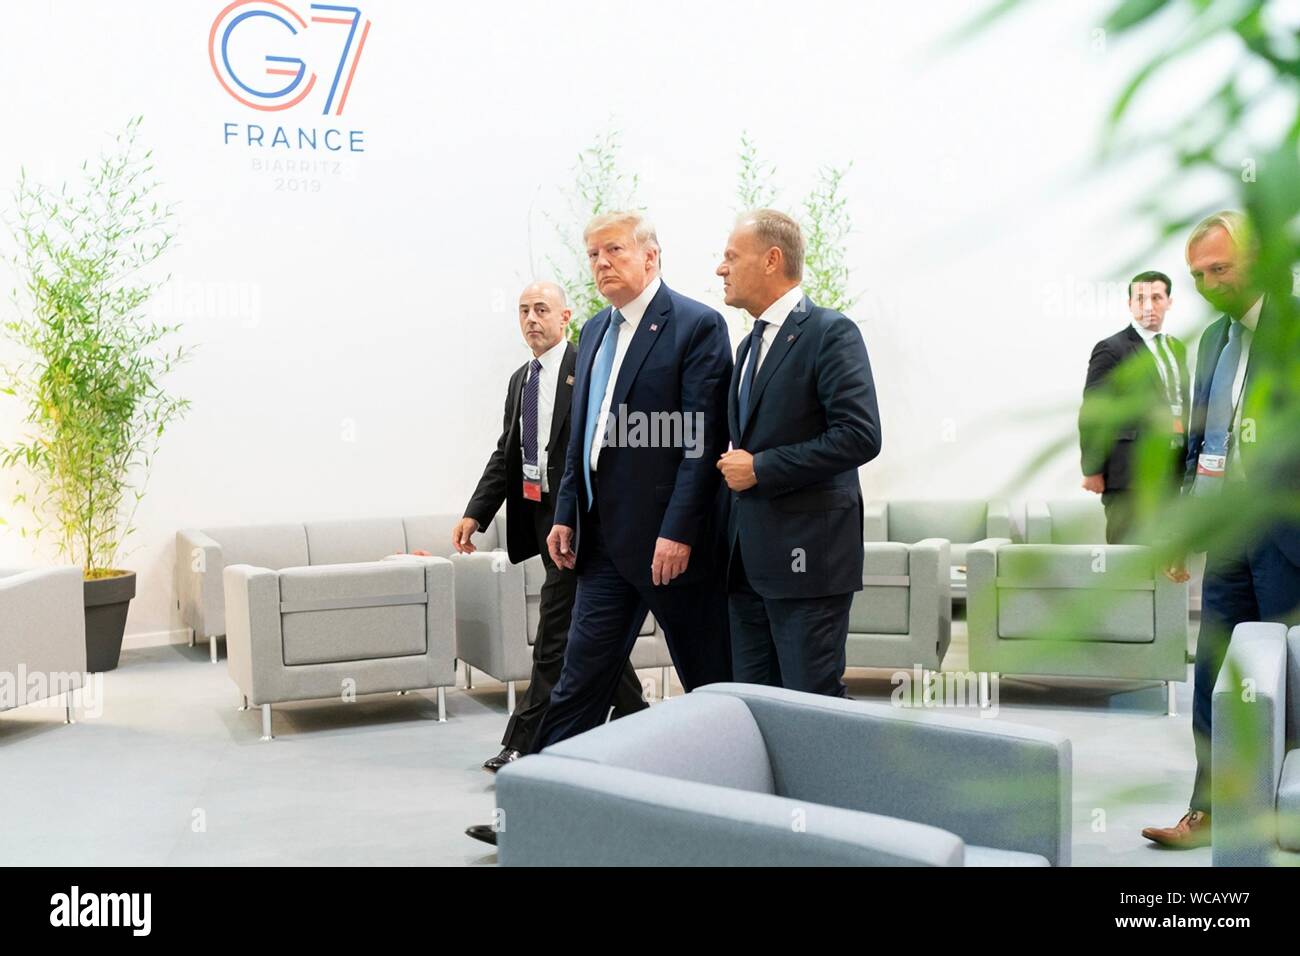 U.S. President Donald Trump, center, walks with European Council President Donald Tusk, right, before the start of a G7 Working Session on the Global Economy, Foreign Policy and Security Affairs at the Centre de Congrés Bellevue August 25, 2019 in Biarritz, France. Stock Photo